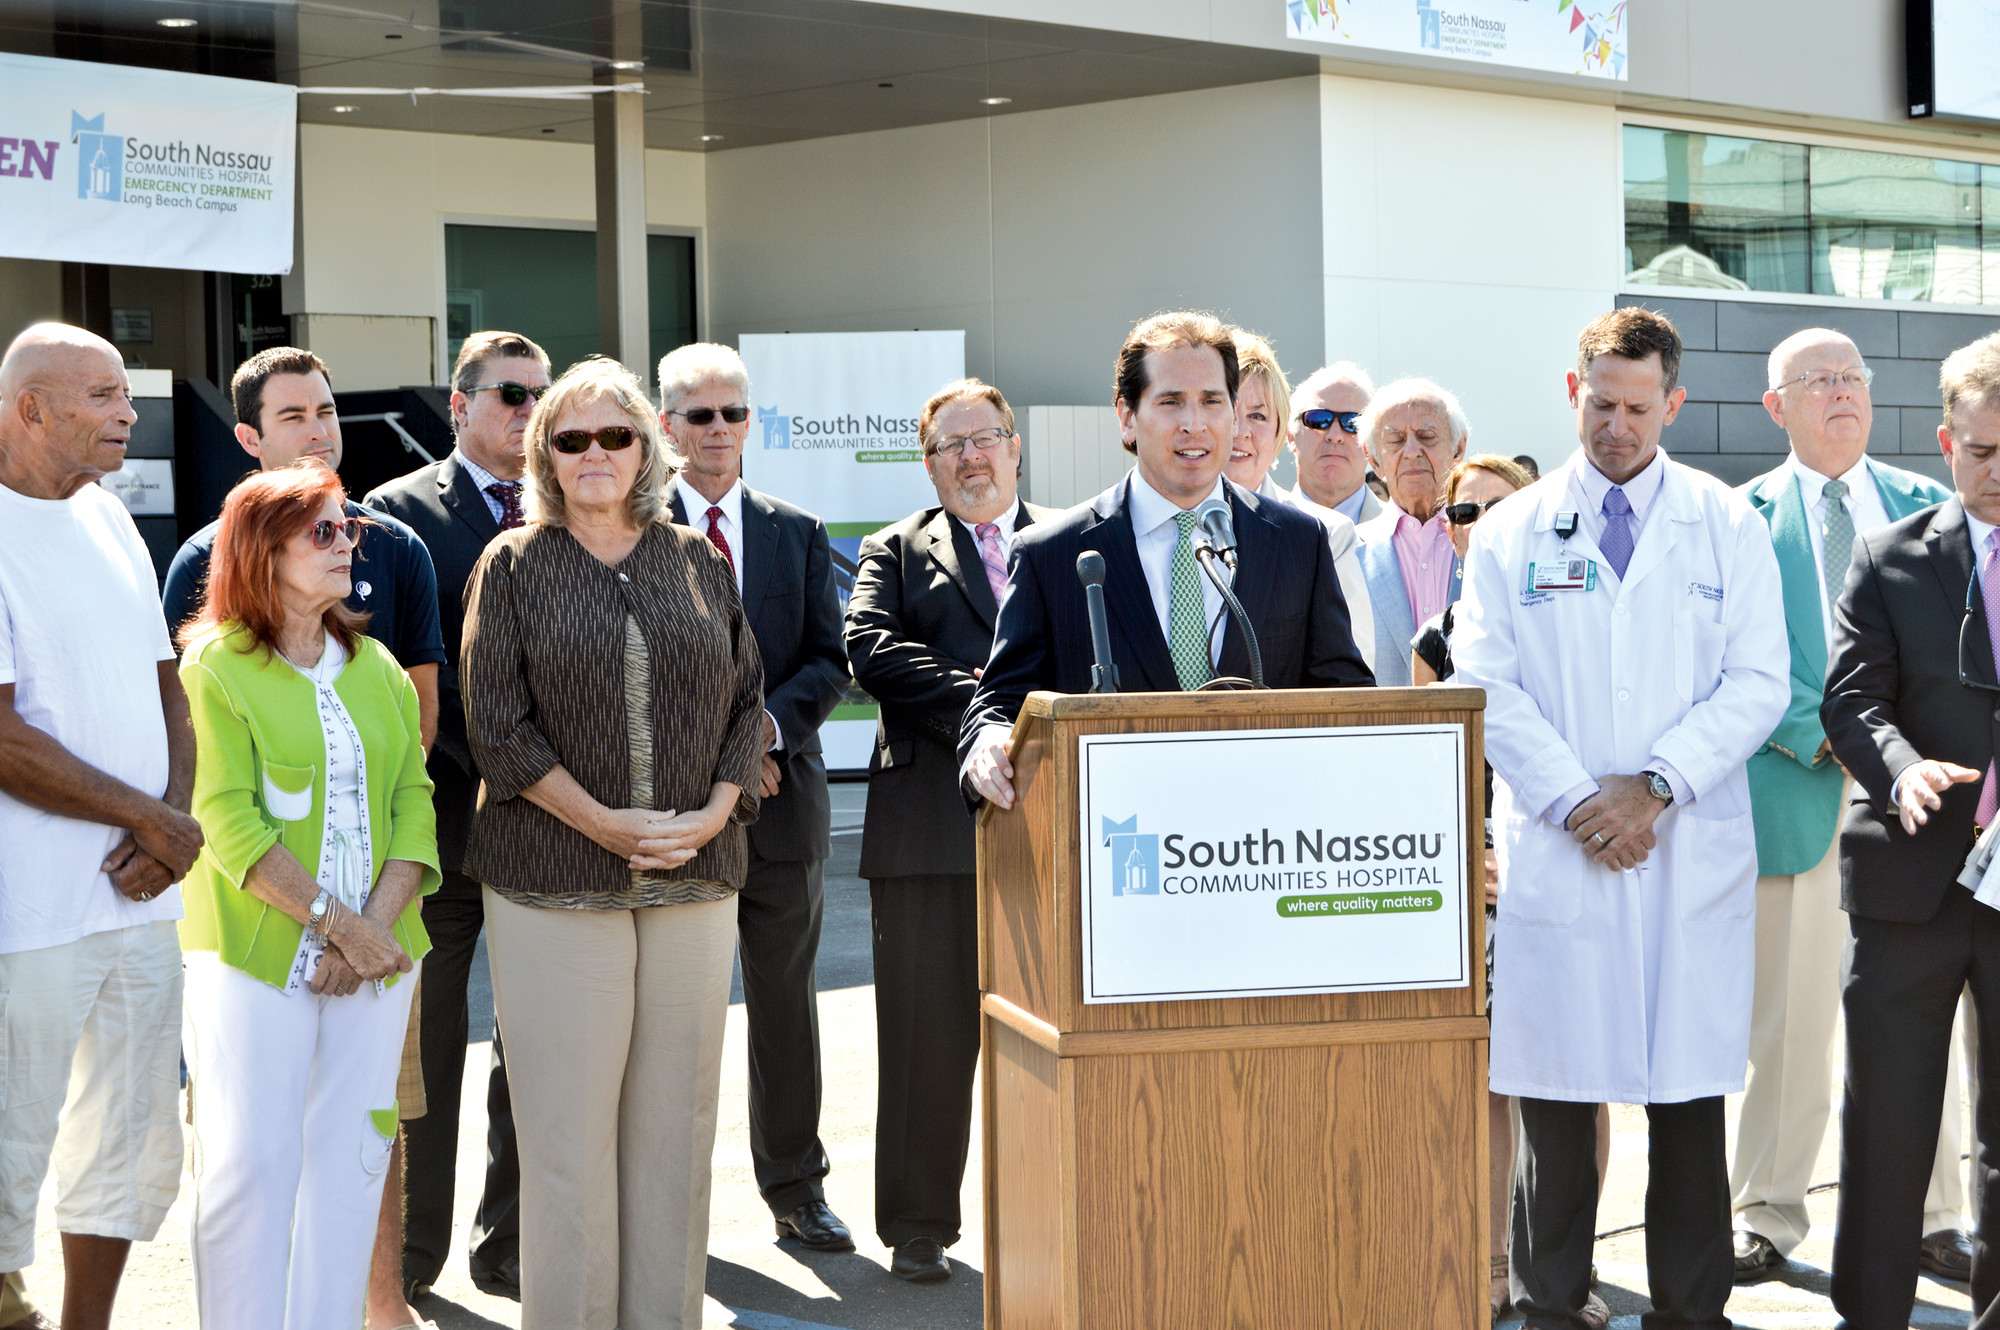 State Assemblyman Todd Kaminsky, at podium, County Legislator Denise Ford, third from left, and other officials spoke at the ribbon-cutting ceremony.